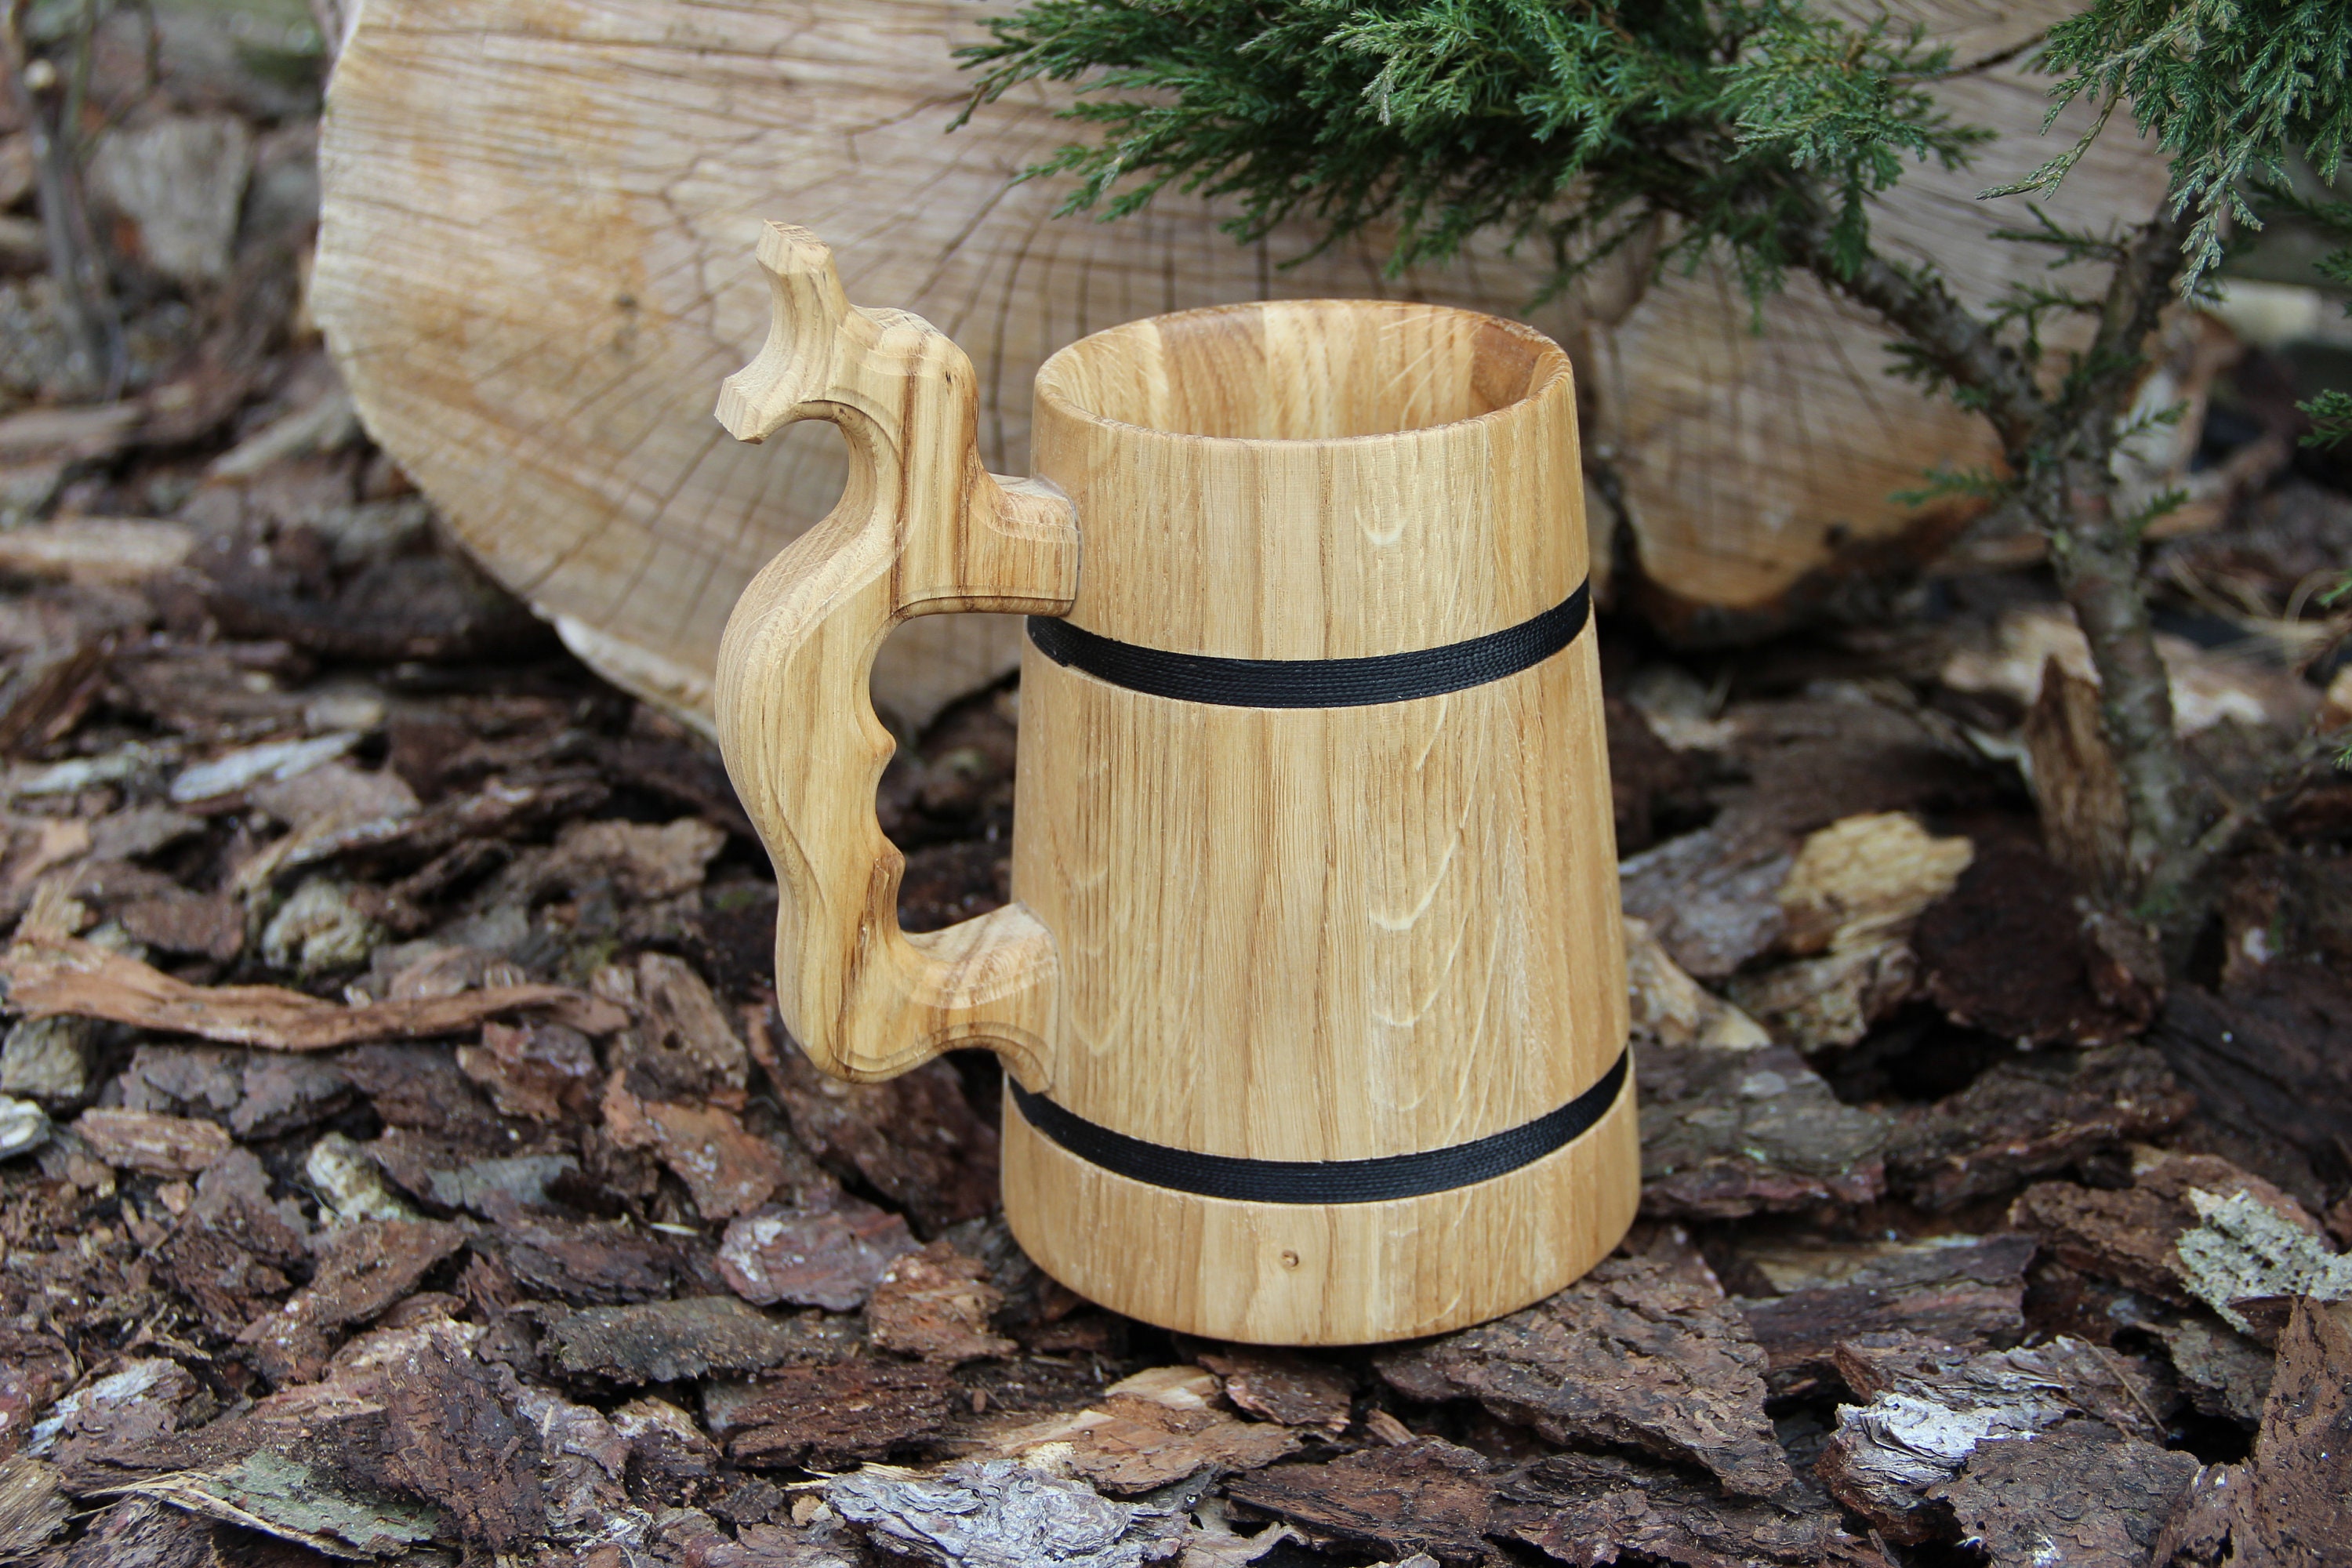  Mandalorians Beer Mug, 22 oz, SW Wooden Beer Stein, Geek Gift,  Personalized Tankard, Custom Gift for Men, Gift for Him : Handmade Products